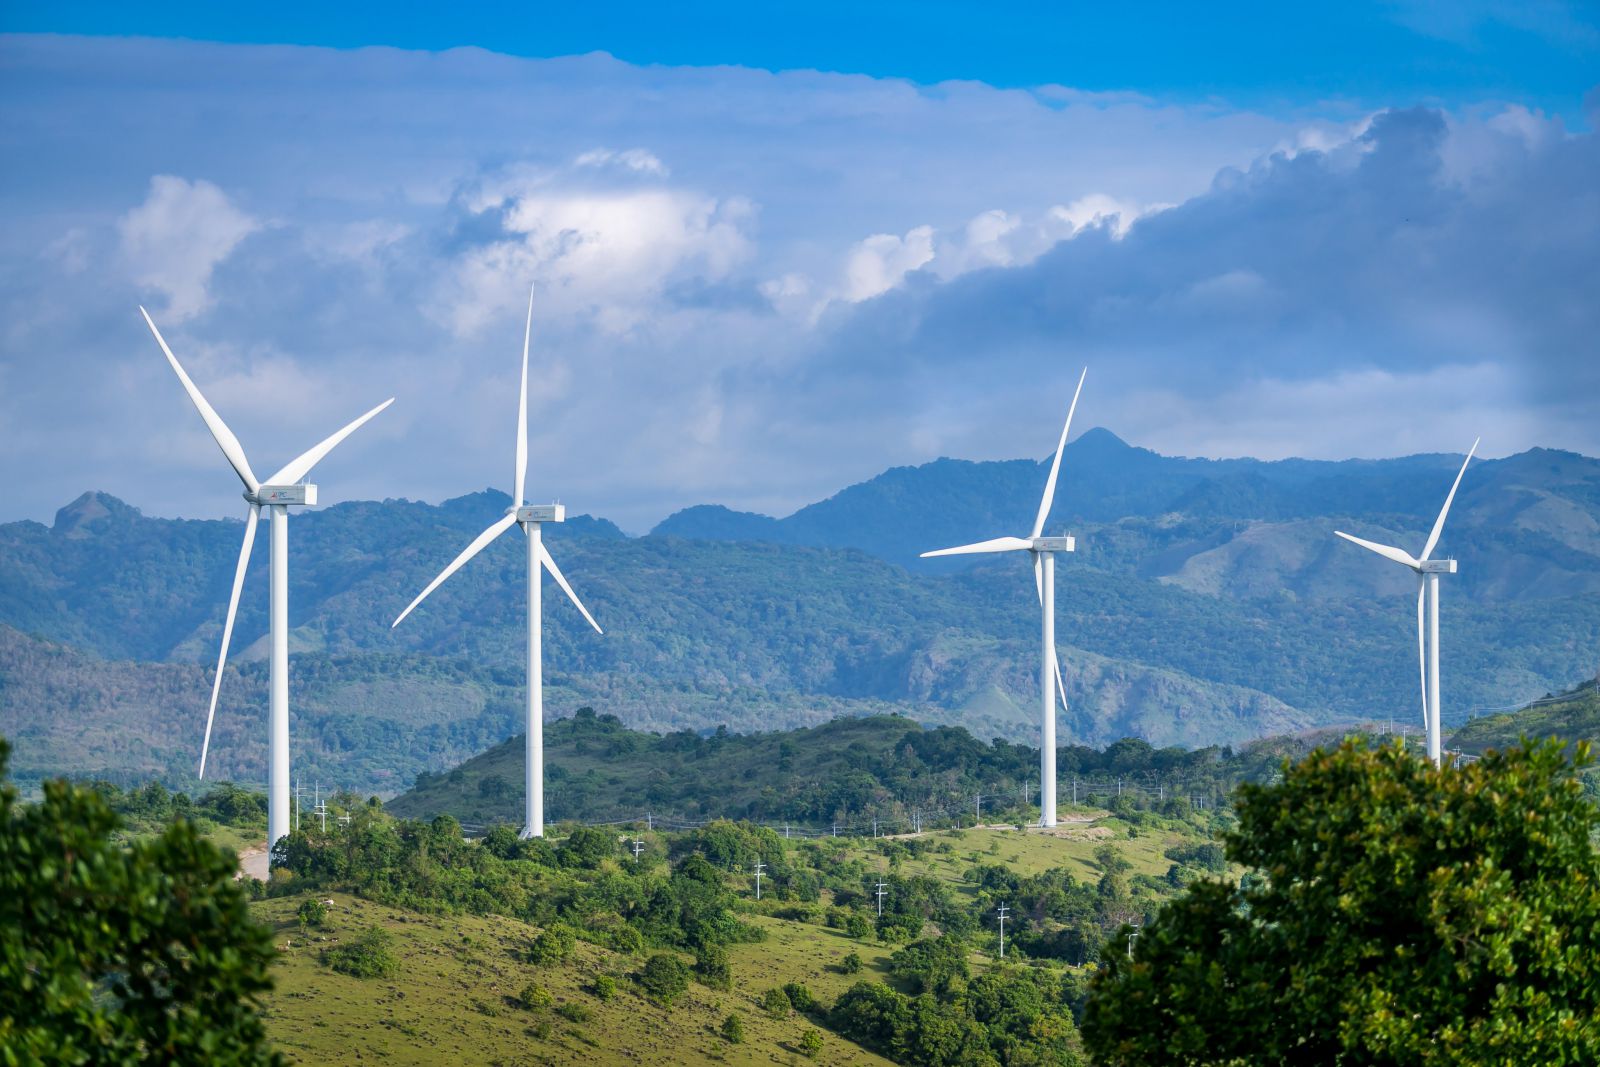 photo, wind turbines on a hill, PT Sidrap UPC, wind farm, OPIC, Overseas Private Investment Corporation, Sulawesi, Indonesia, Sumitomo Mitsui Banking Corporation, electricity, clean power, infrastructure